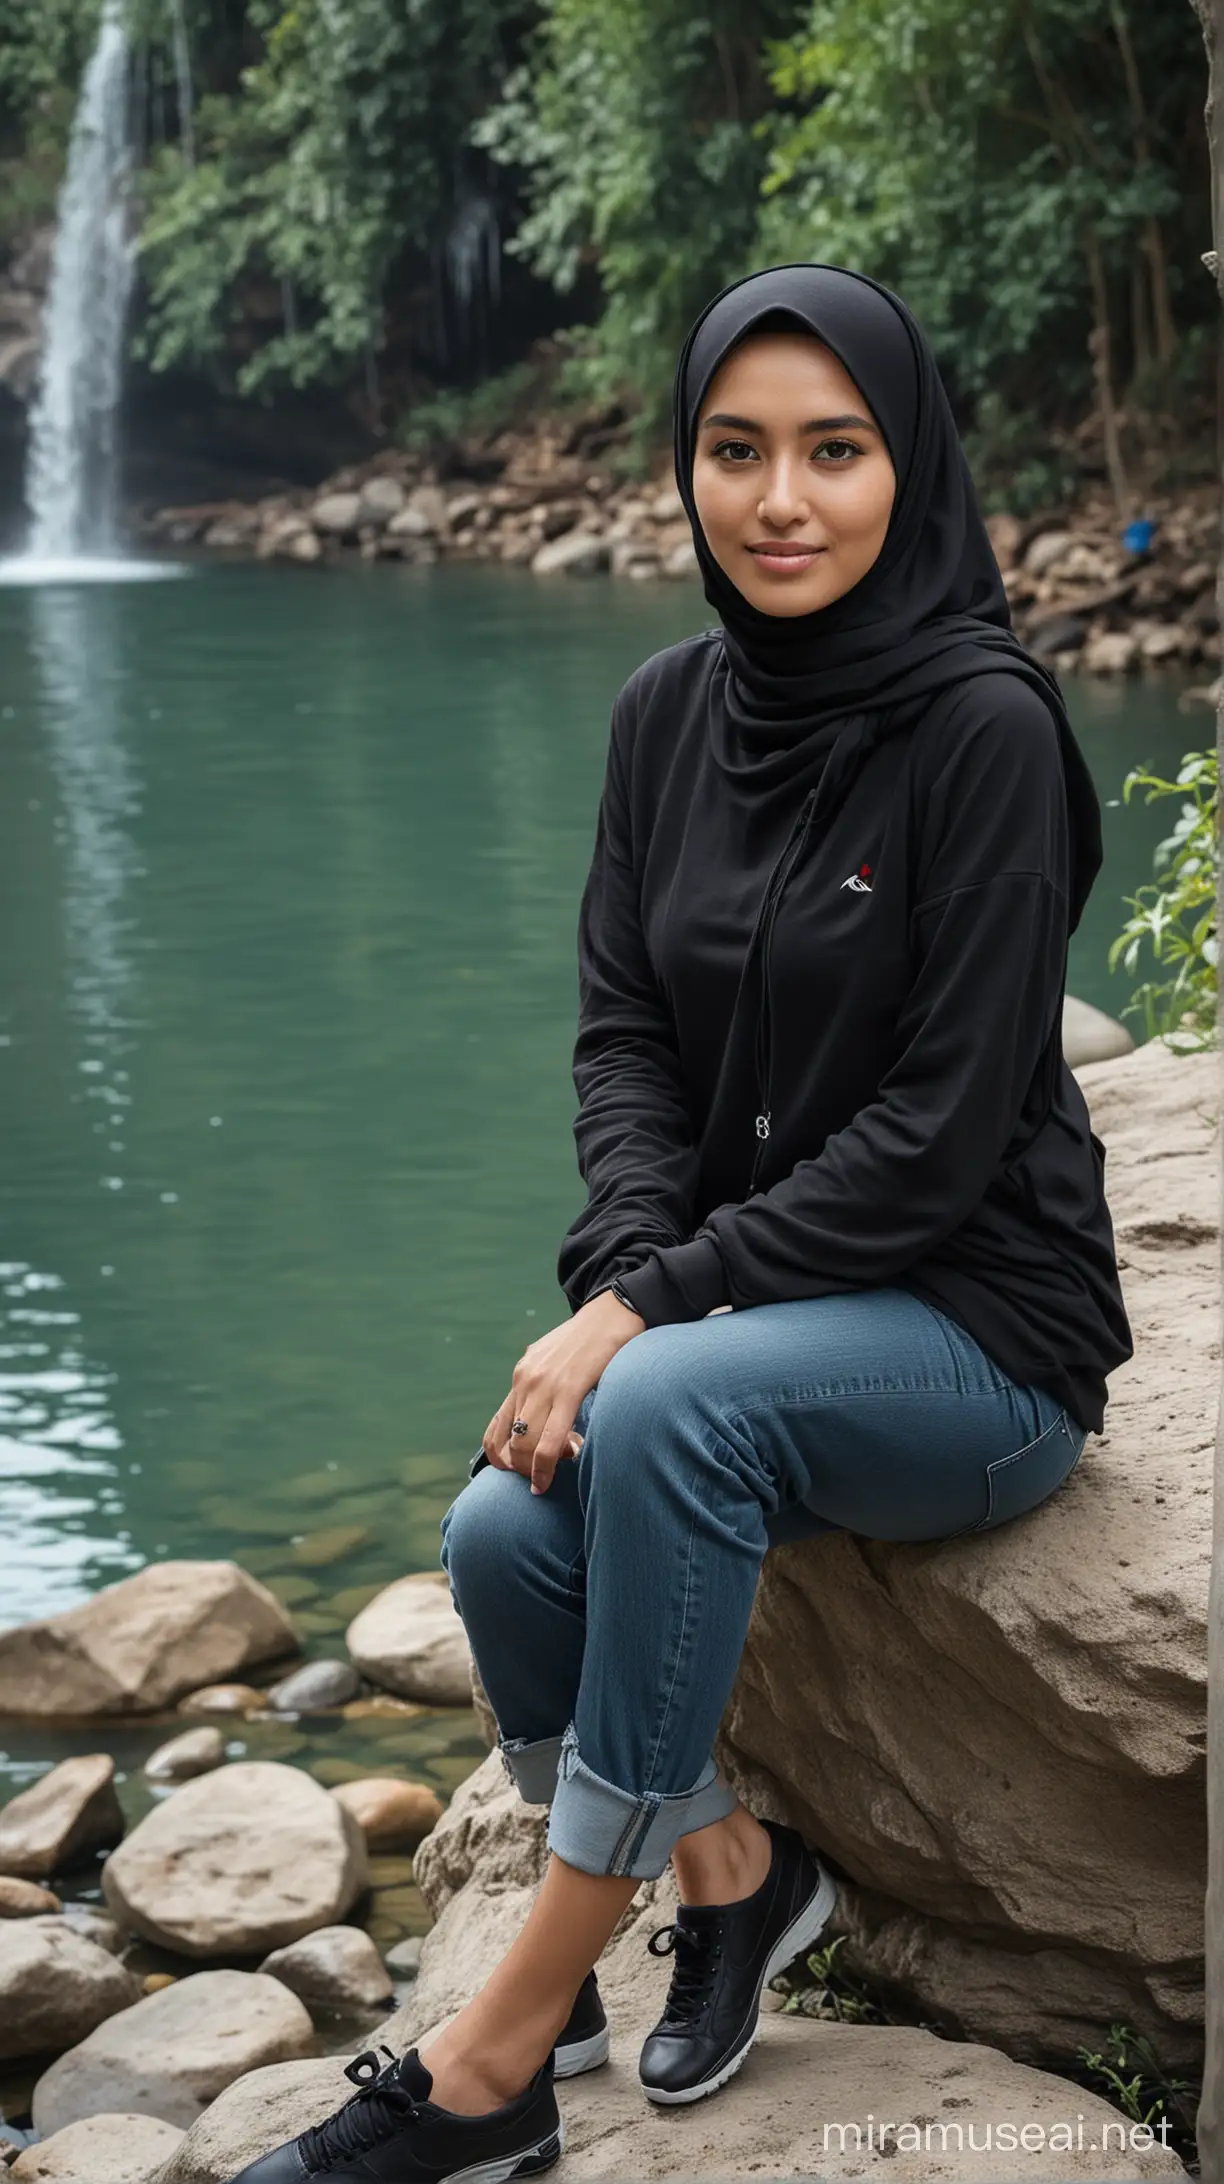 Turkish Woman in Hijab Sitting by Waterfall with Smartwatch and Nike Shoes